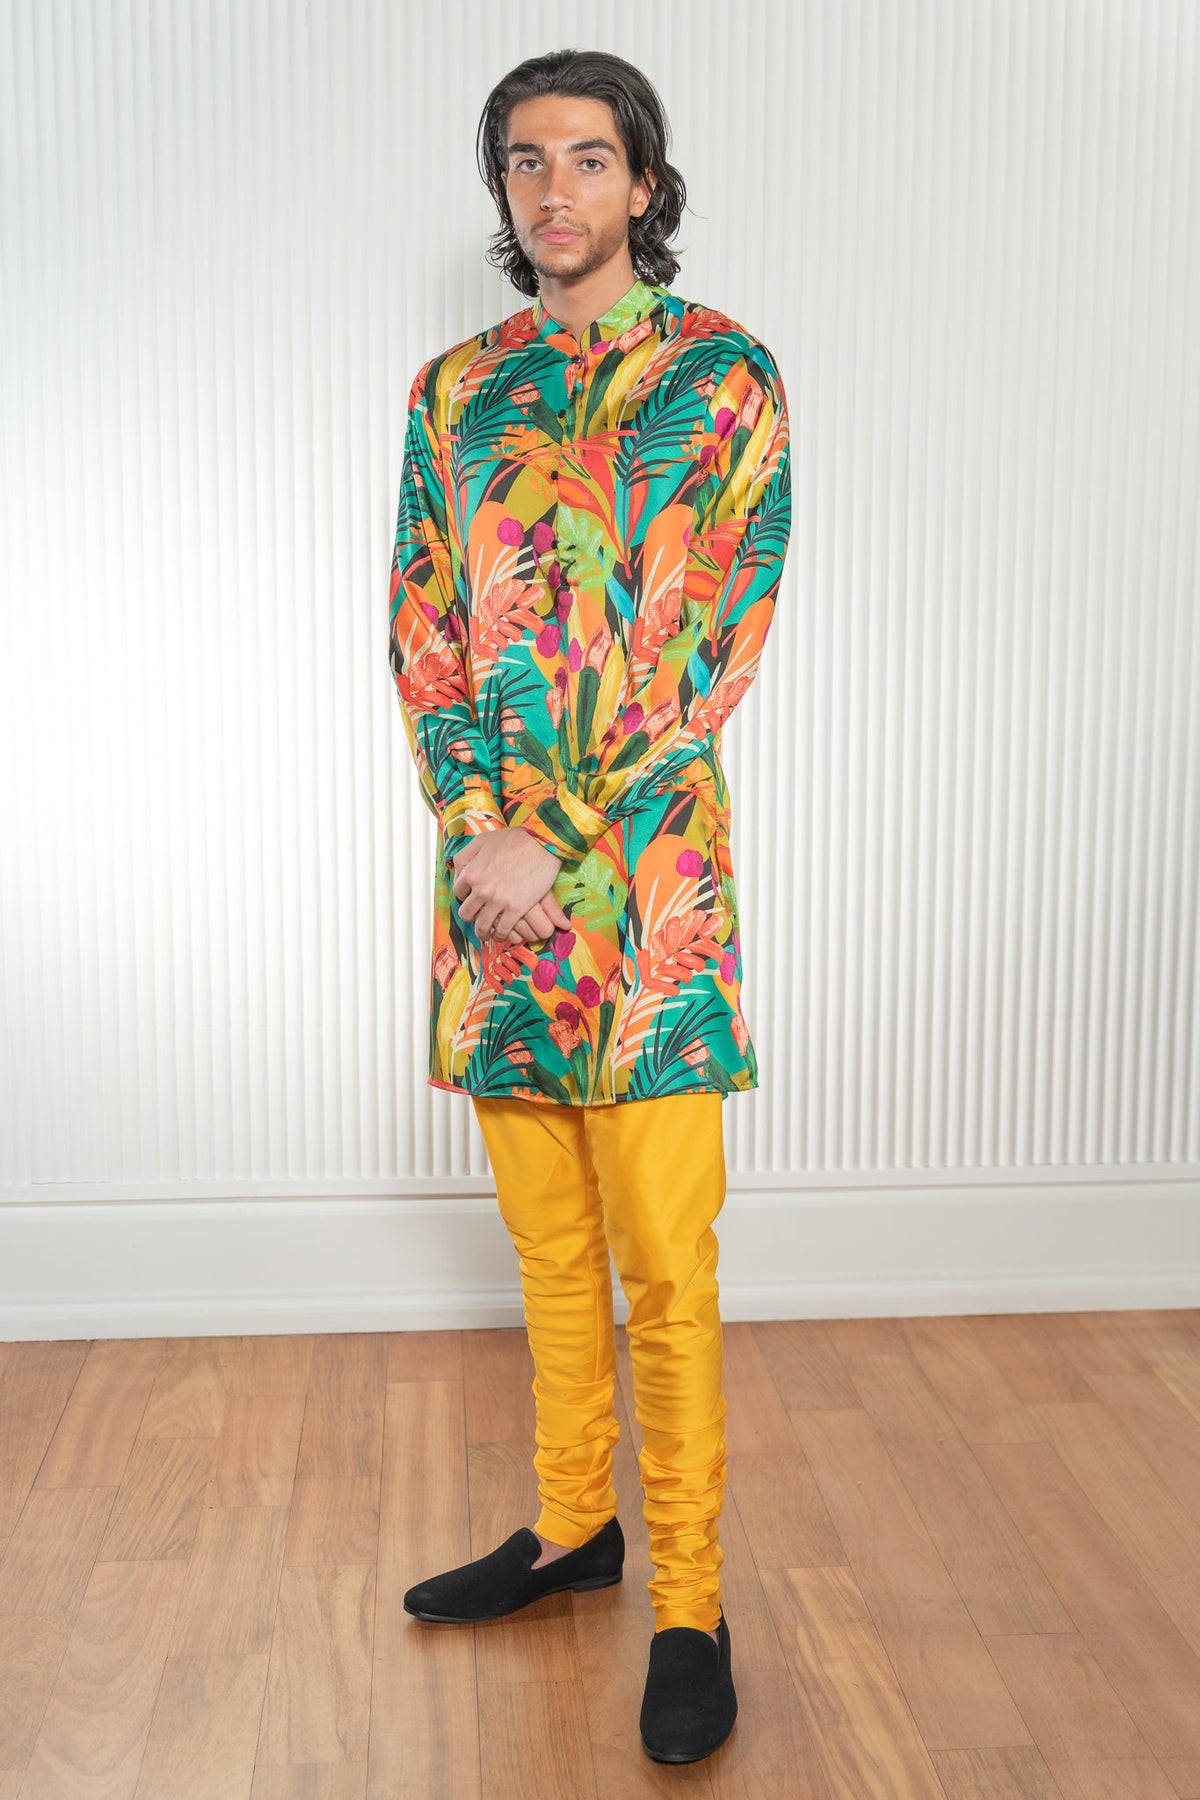 Tropical Floral Print Kurta with hues of Orange, Green, and Golden Yellows - Front View - Harleen Kaur - Indian Menswear